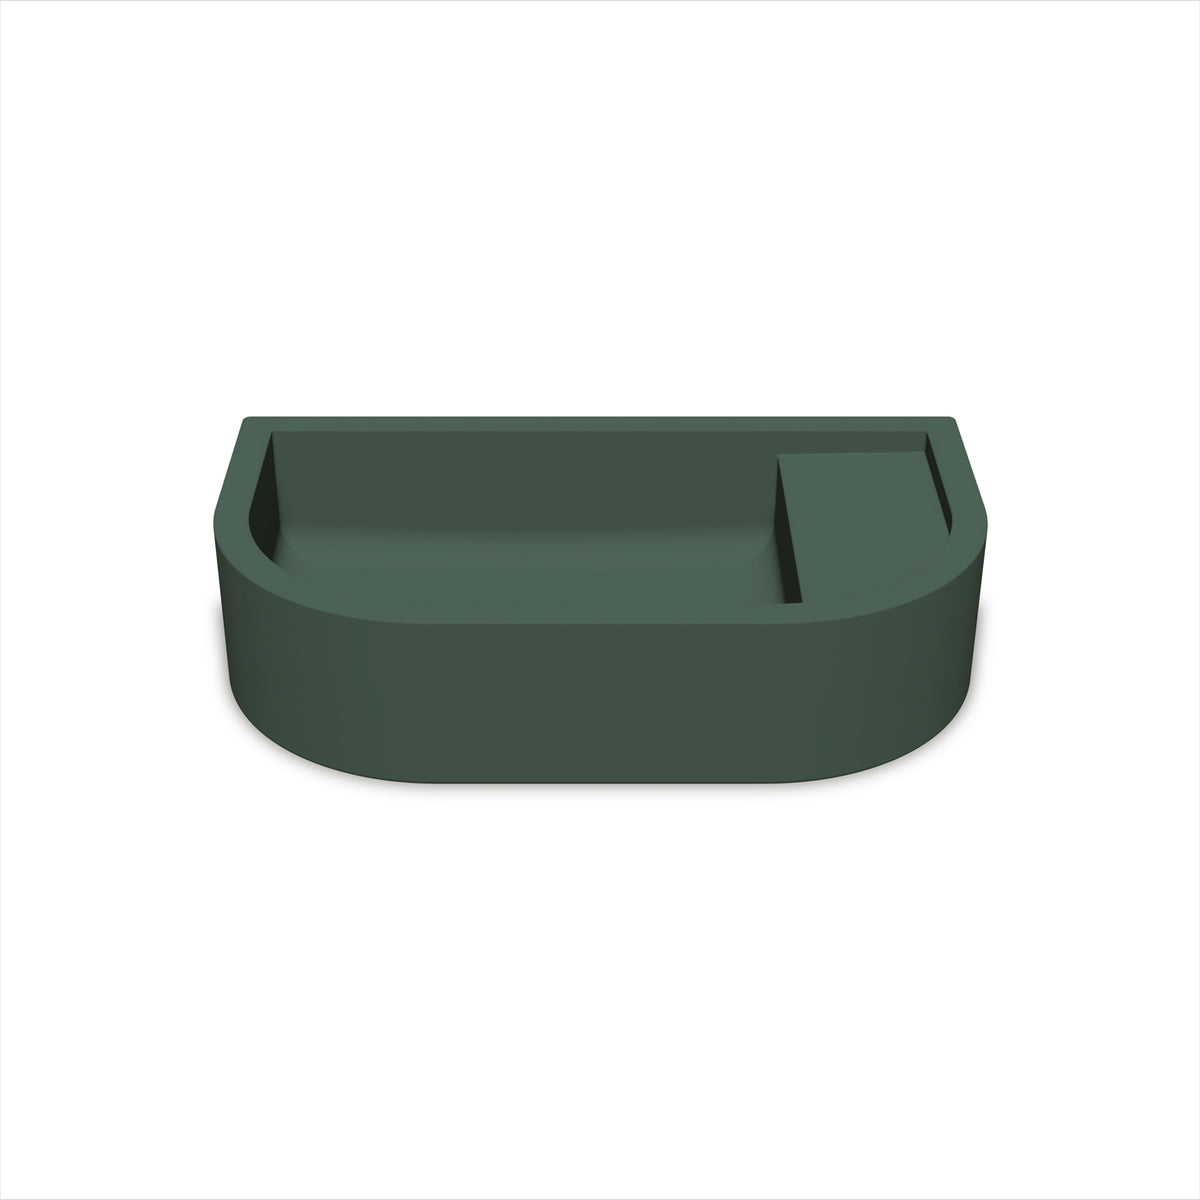 Loop 02 Basin - Overflow - Surface Mount (Teal,No Tap Hole,Chrome)